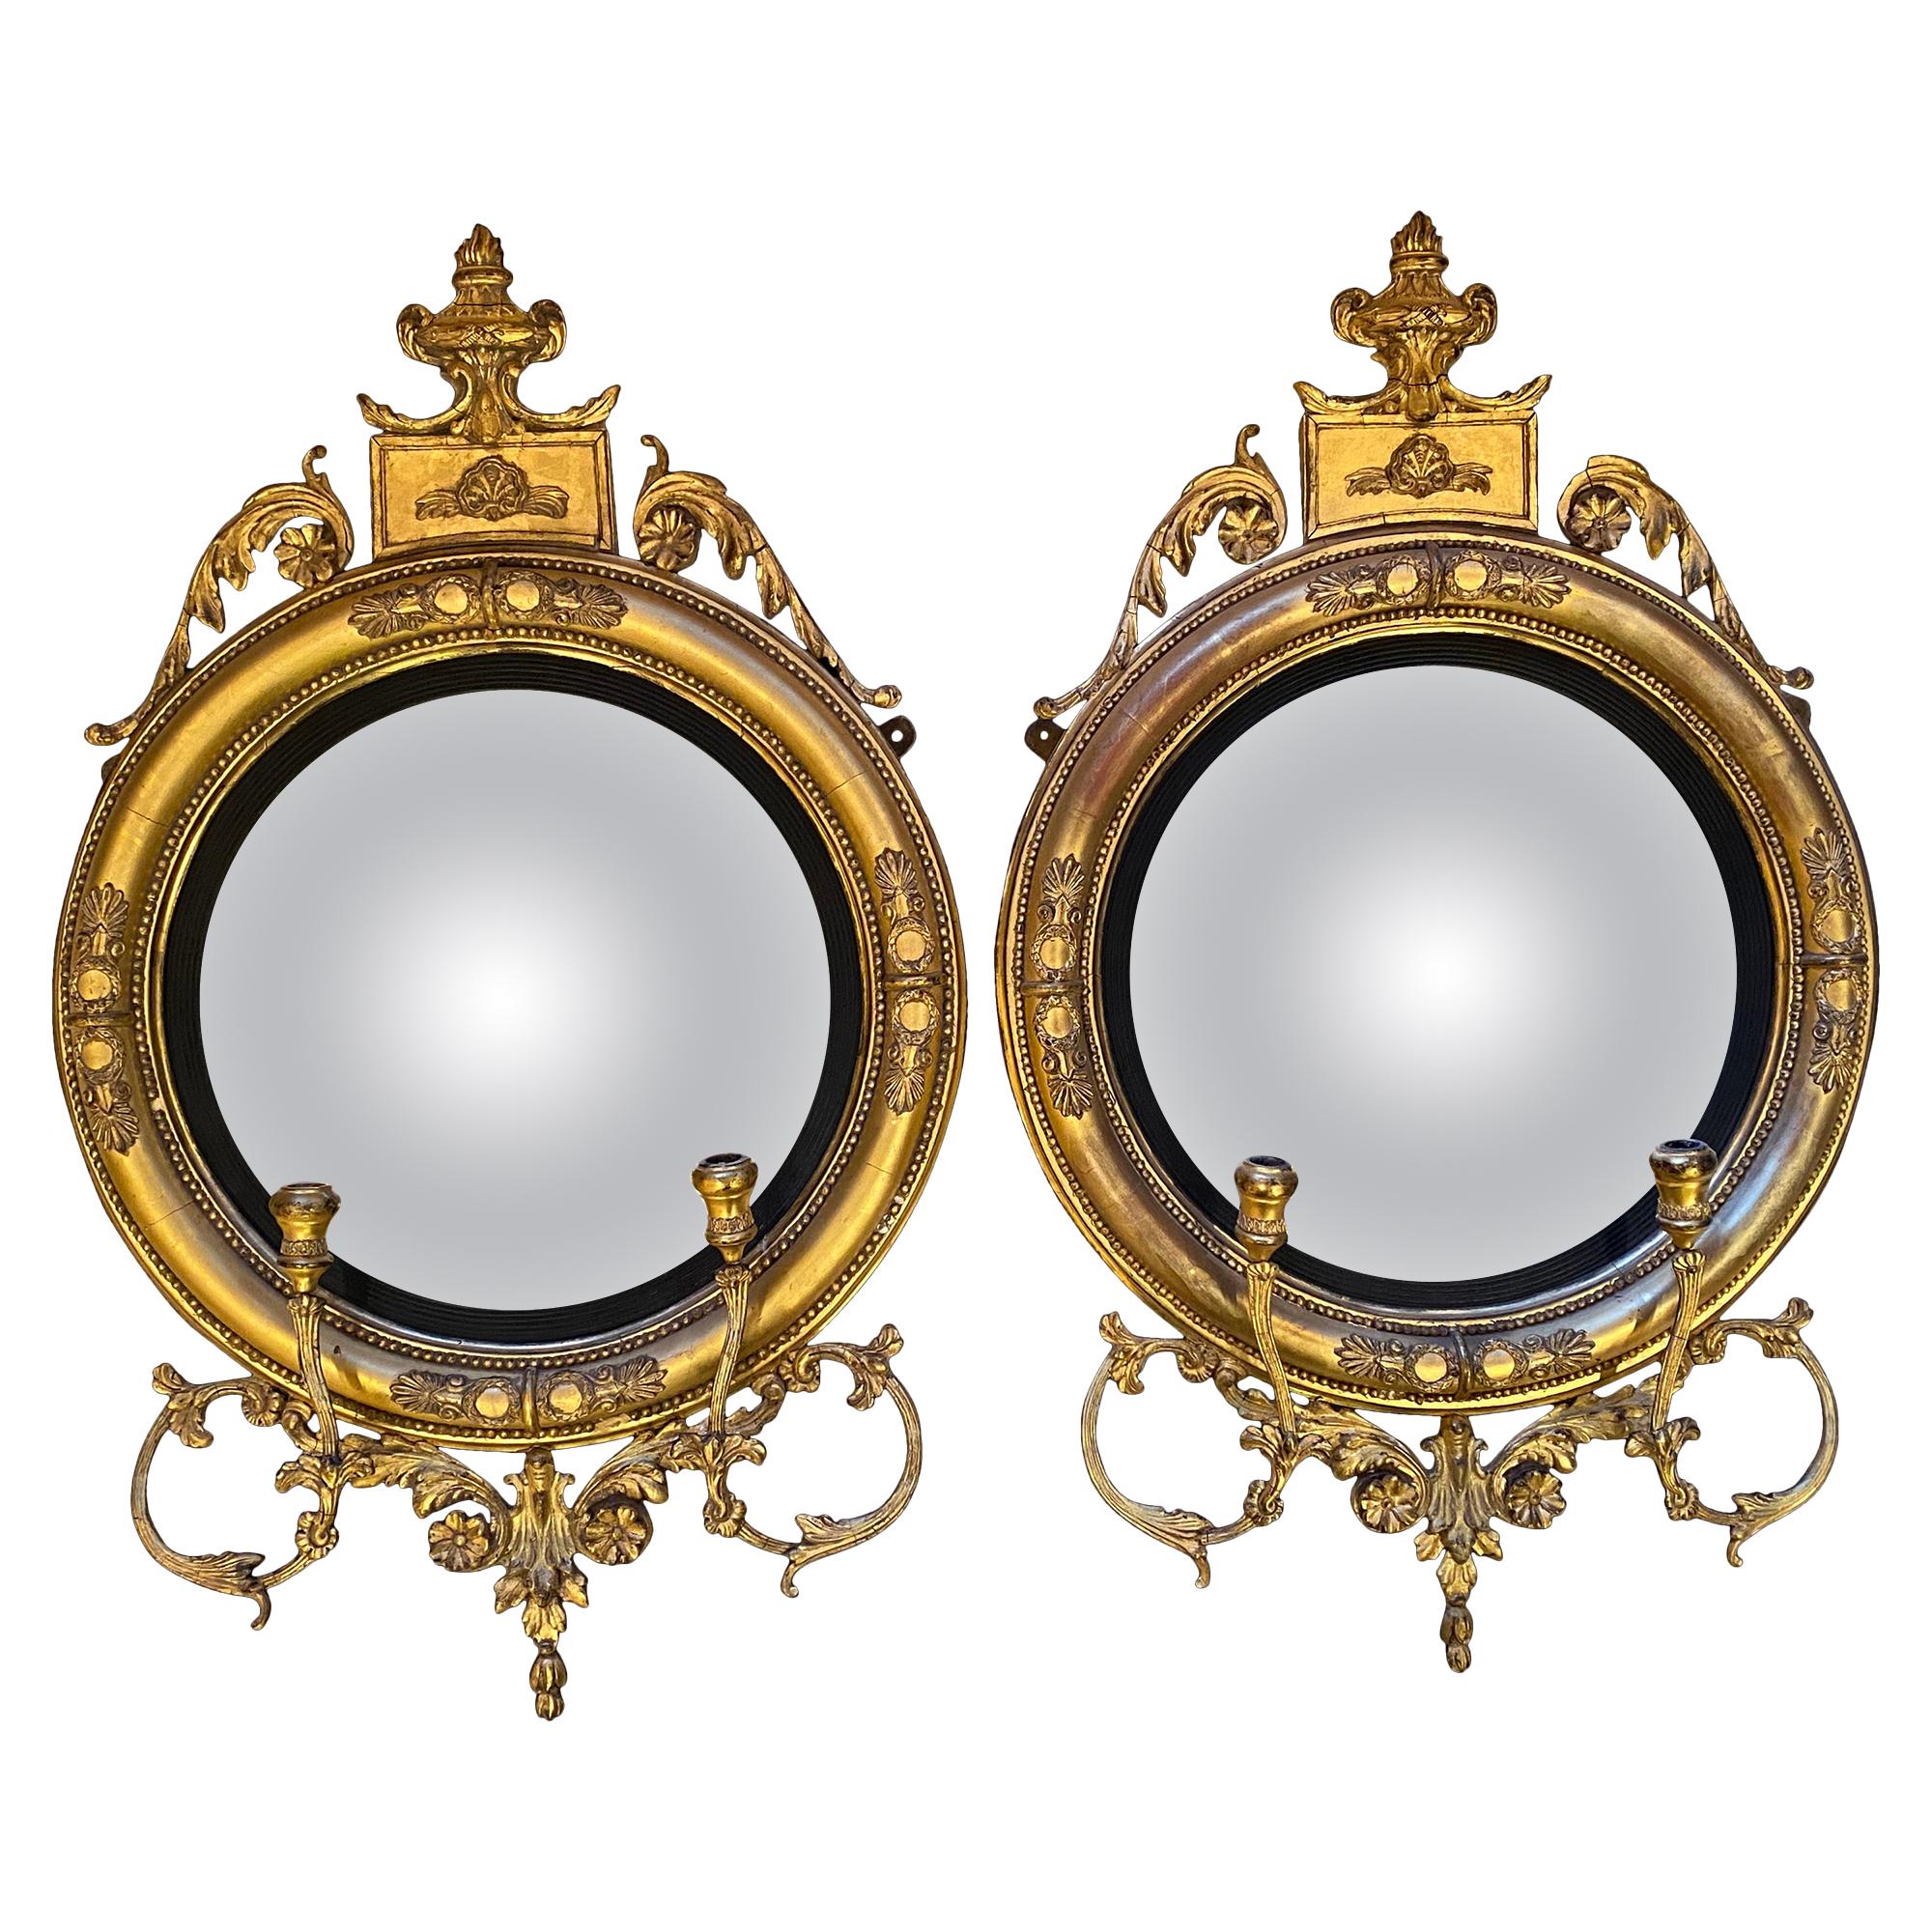 Fine Pair of Regency Convex Mirrors, English, circa 1820 For Sale